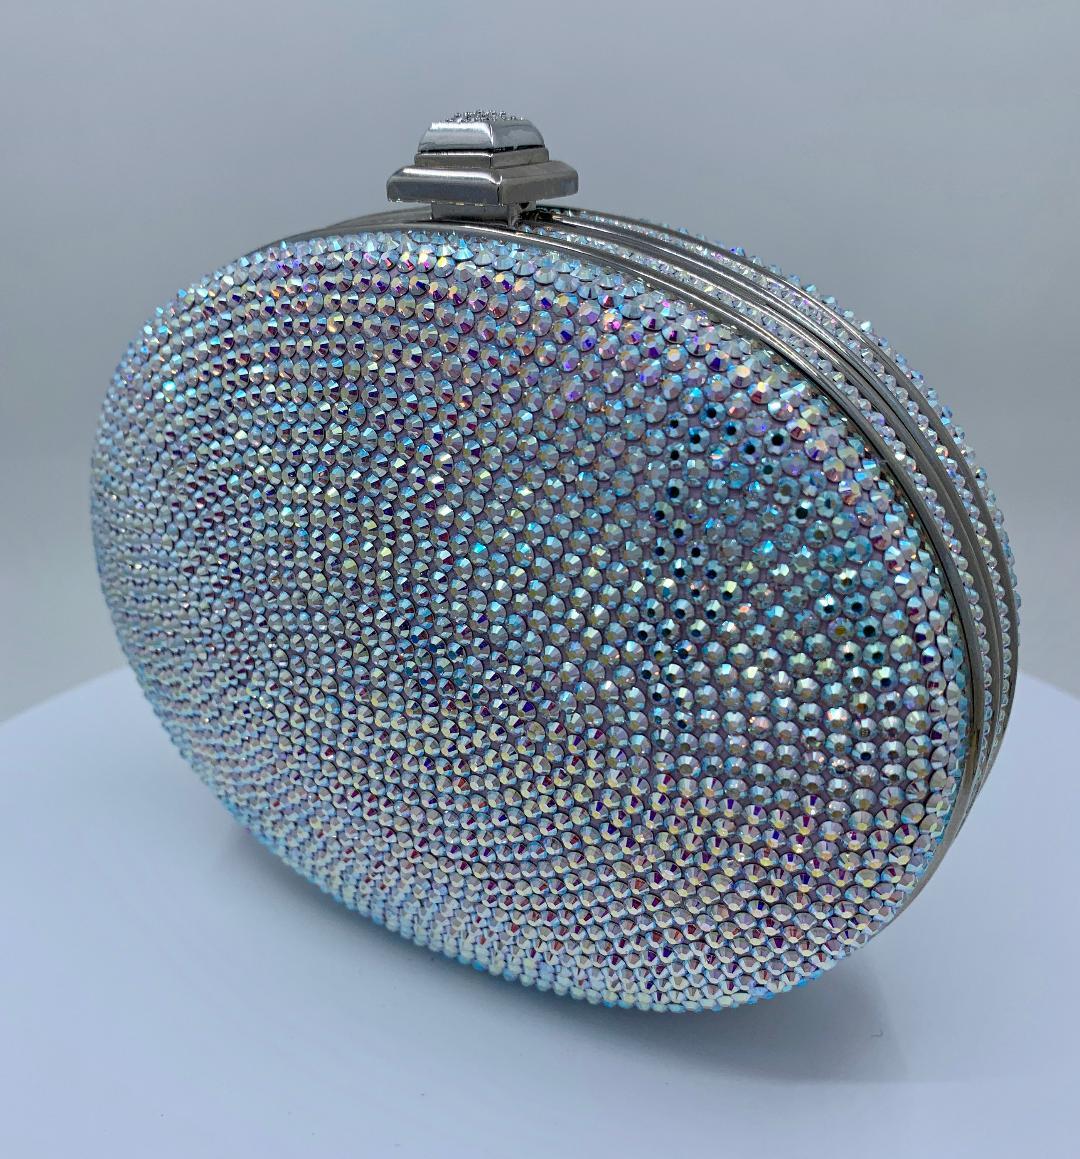 Exquisite handmade couture designer, Judith Leiber, shimmering crystal oval shaped minaudiere evening bag or evening clutch is completely covered in a rainbow of opalescent crystals. Silver toned metal frame with metallic silver leather lined